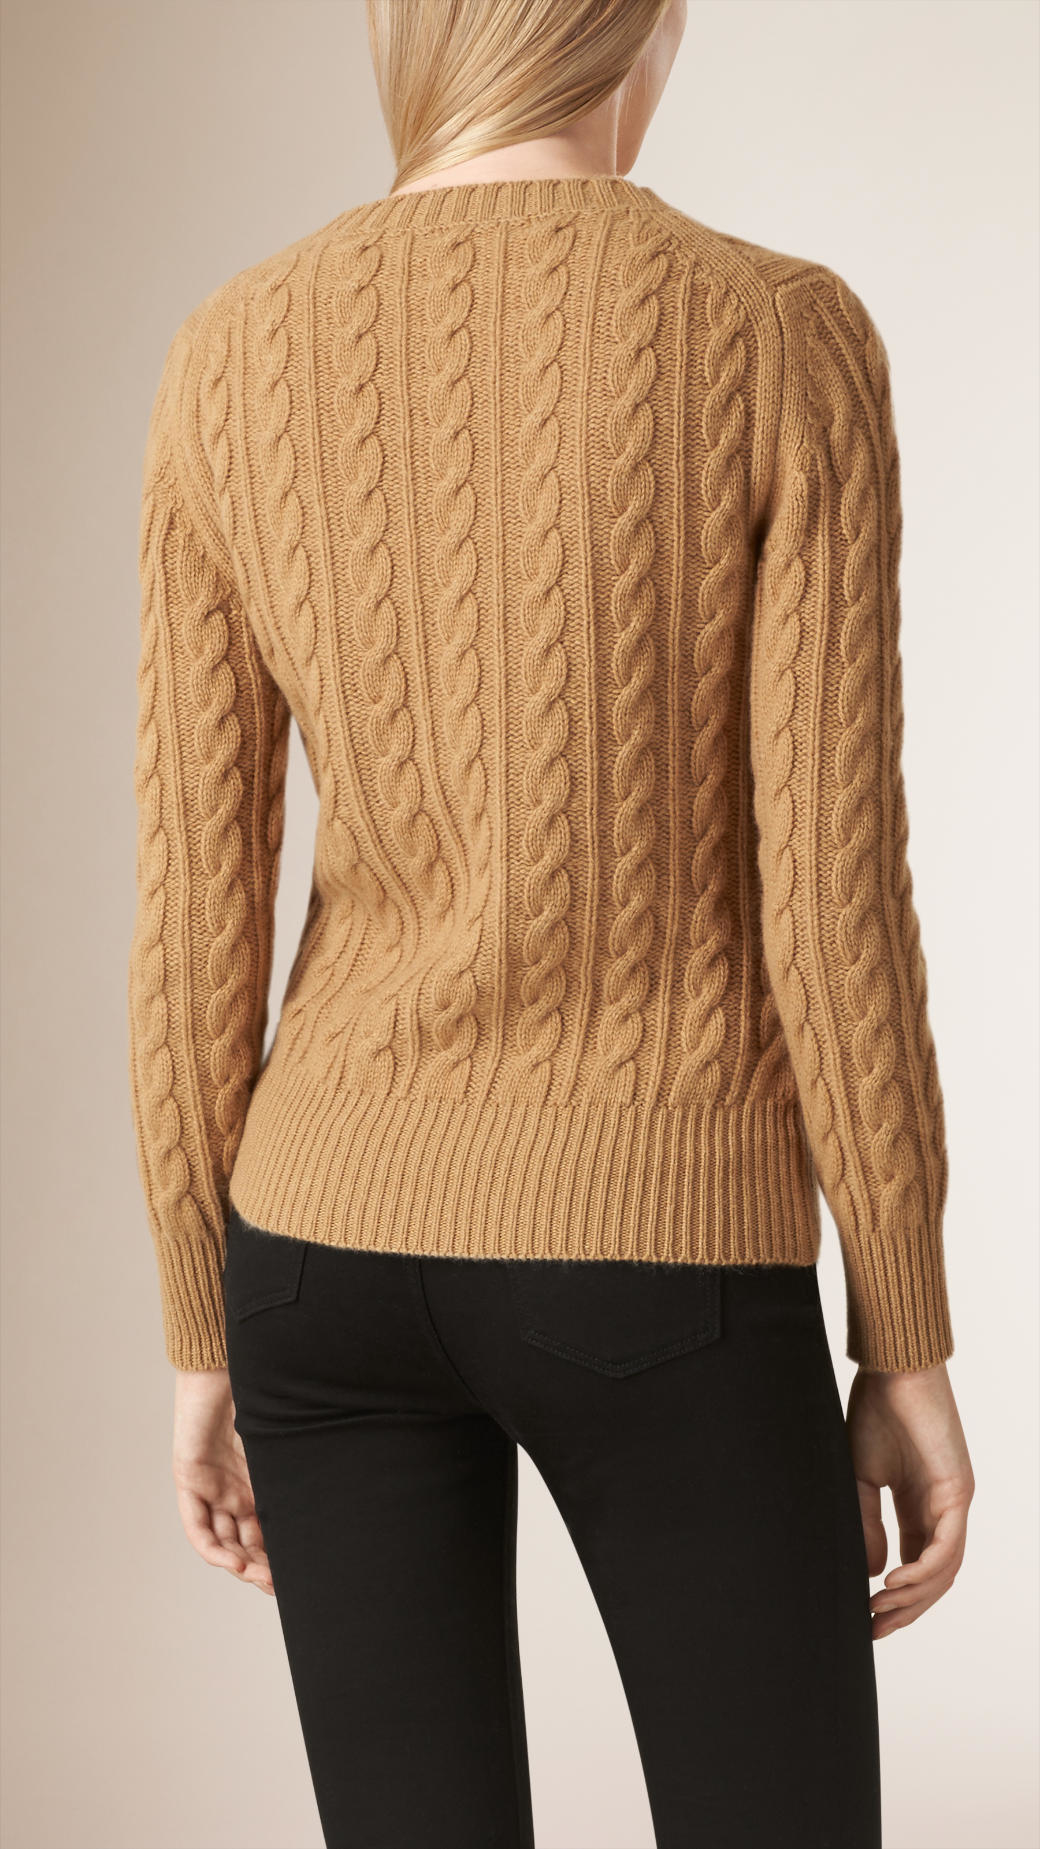 Lyst - Burberry Cable Knit Wool Cashmere Sweater Camel in Natural